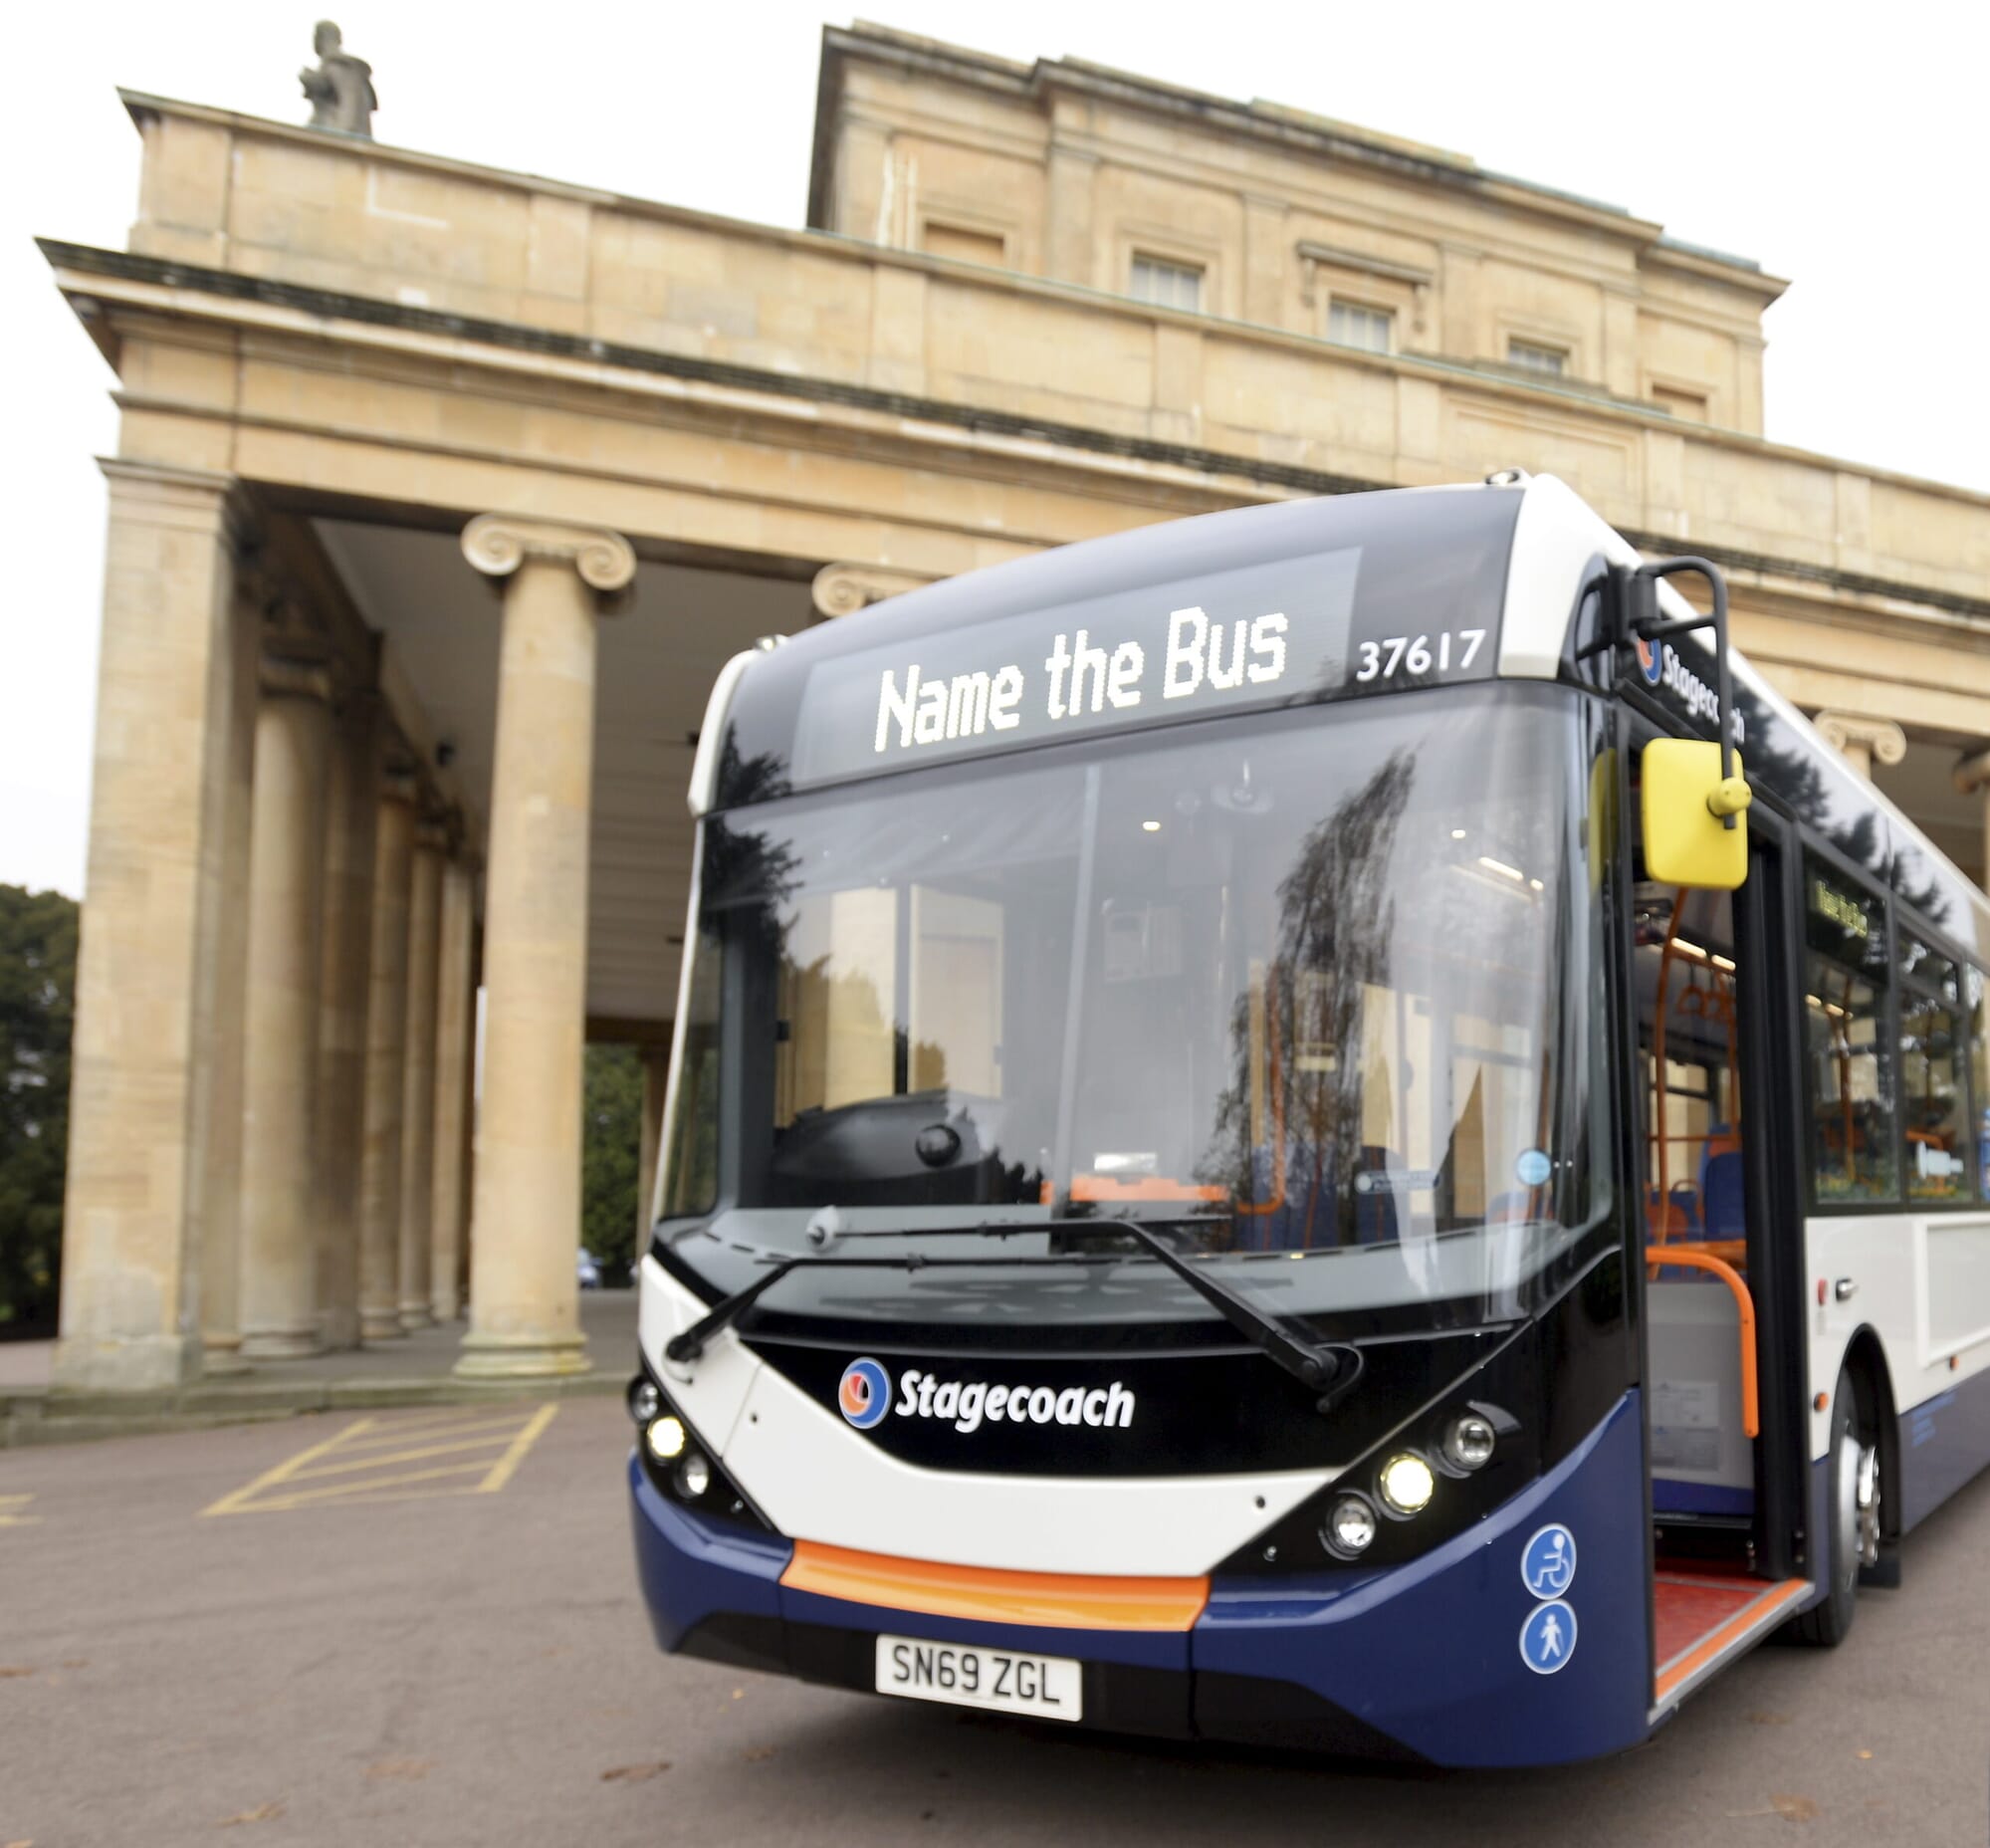 stagecoach-west-name-the-bus-campaign-paul-nicholls-photography-scaled